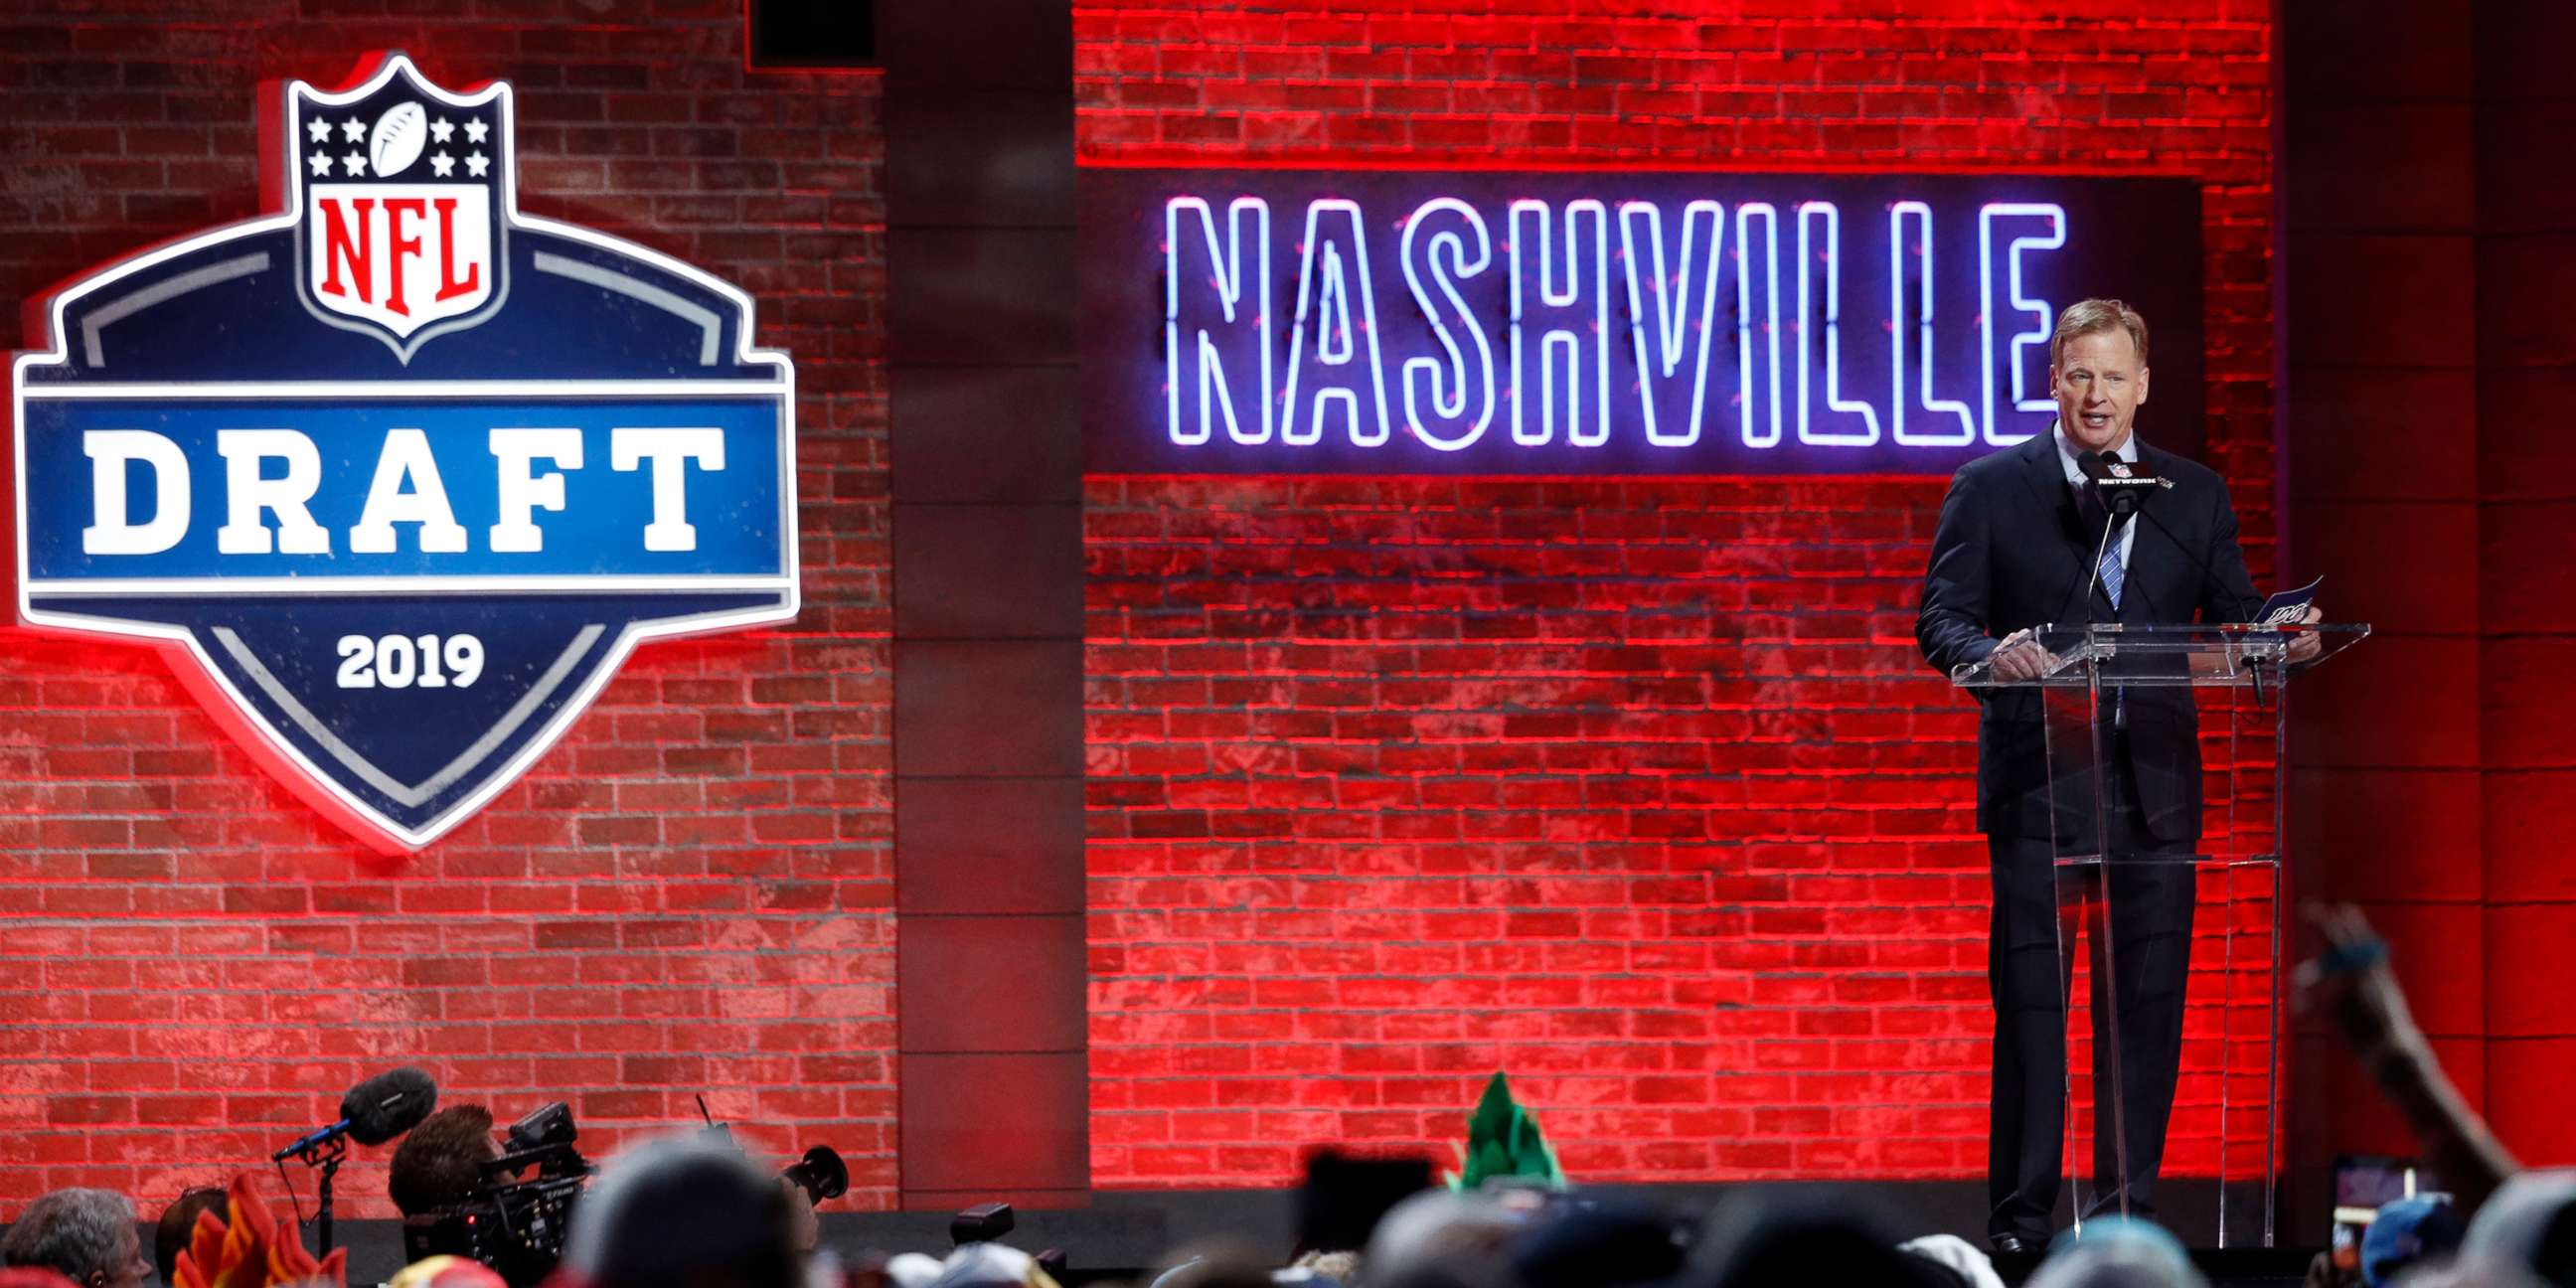 PHOTO: NFL Commissioner Roger Goodell on stage during the first round of the NFL Draft on April 25, 2019 in Nashville.